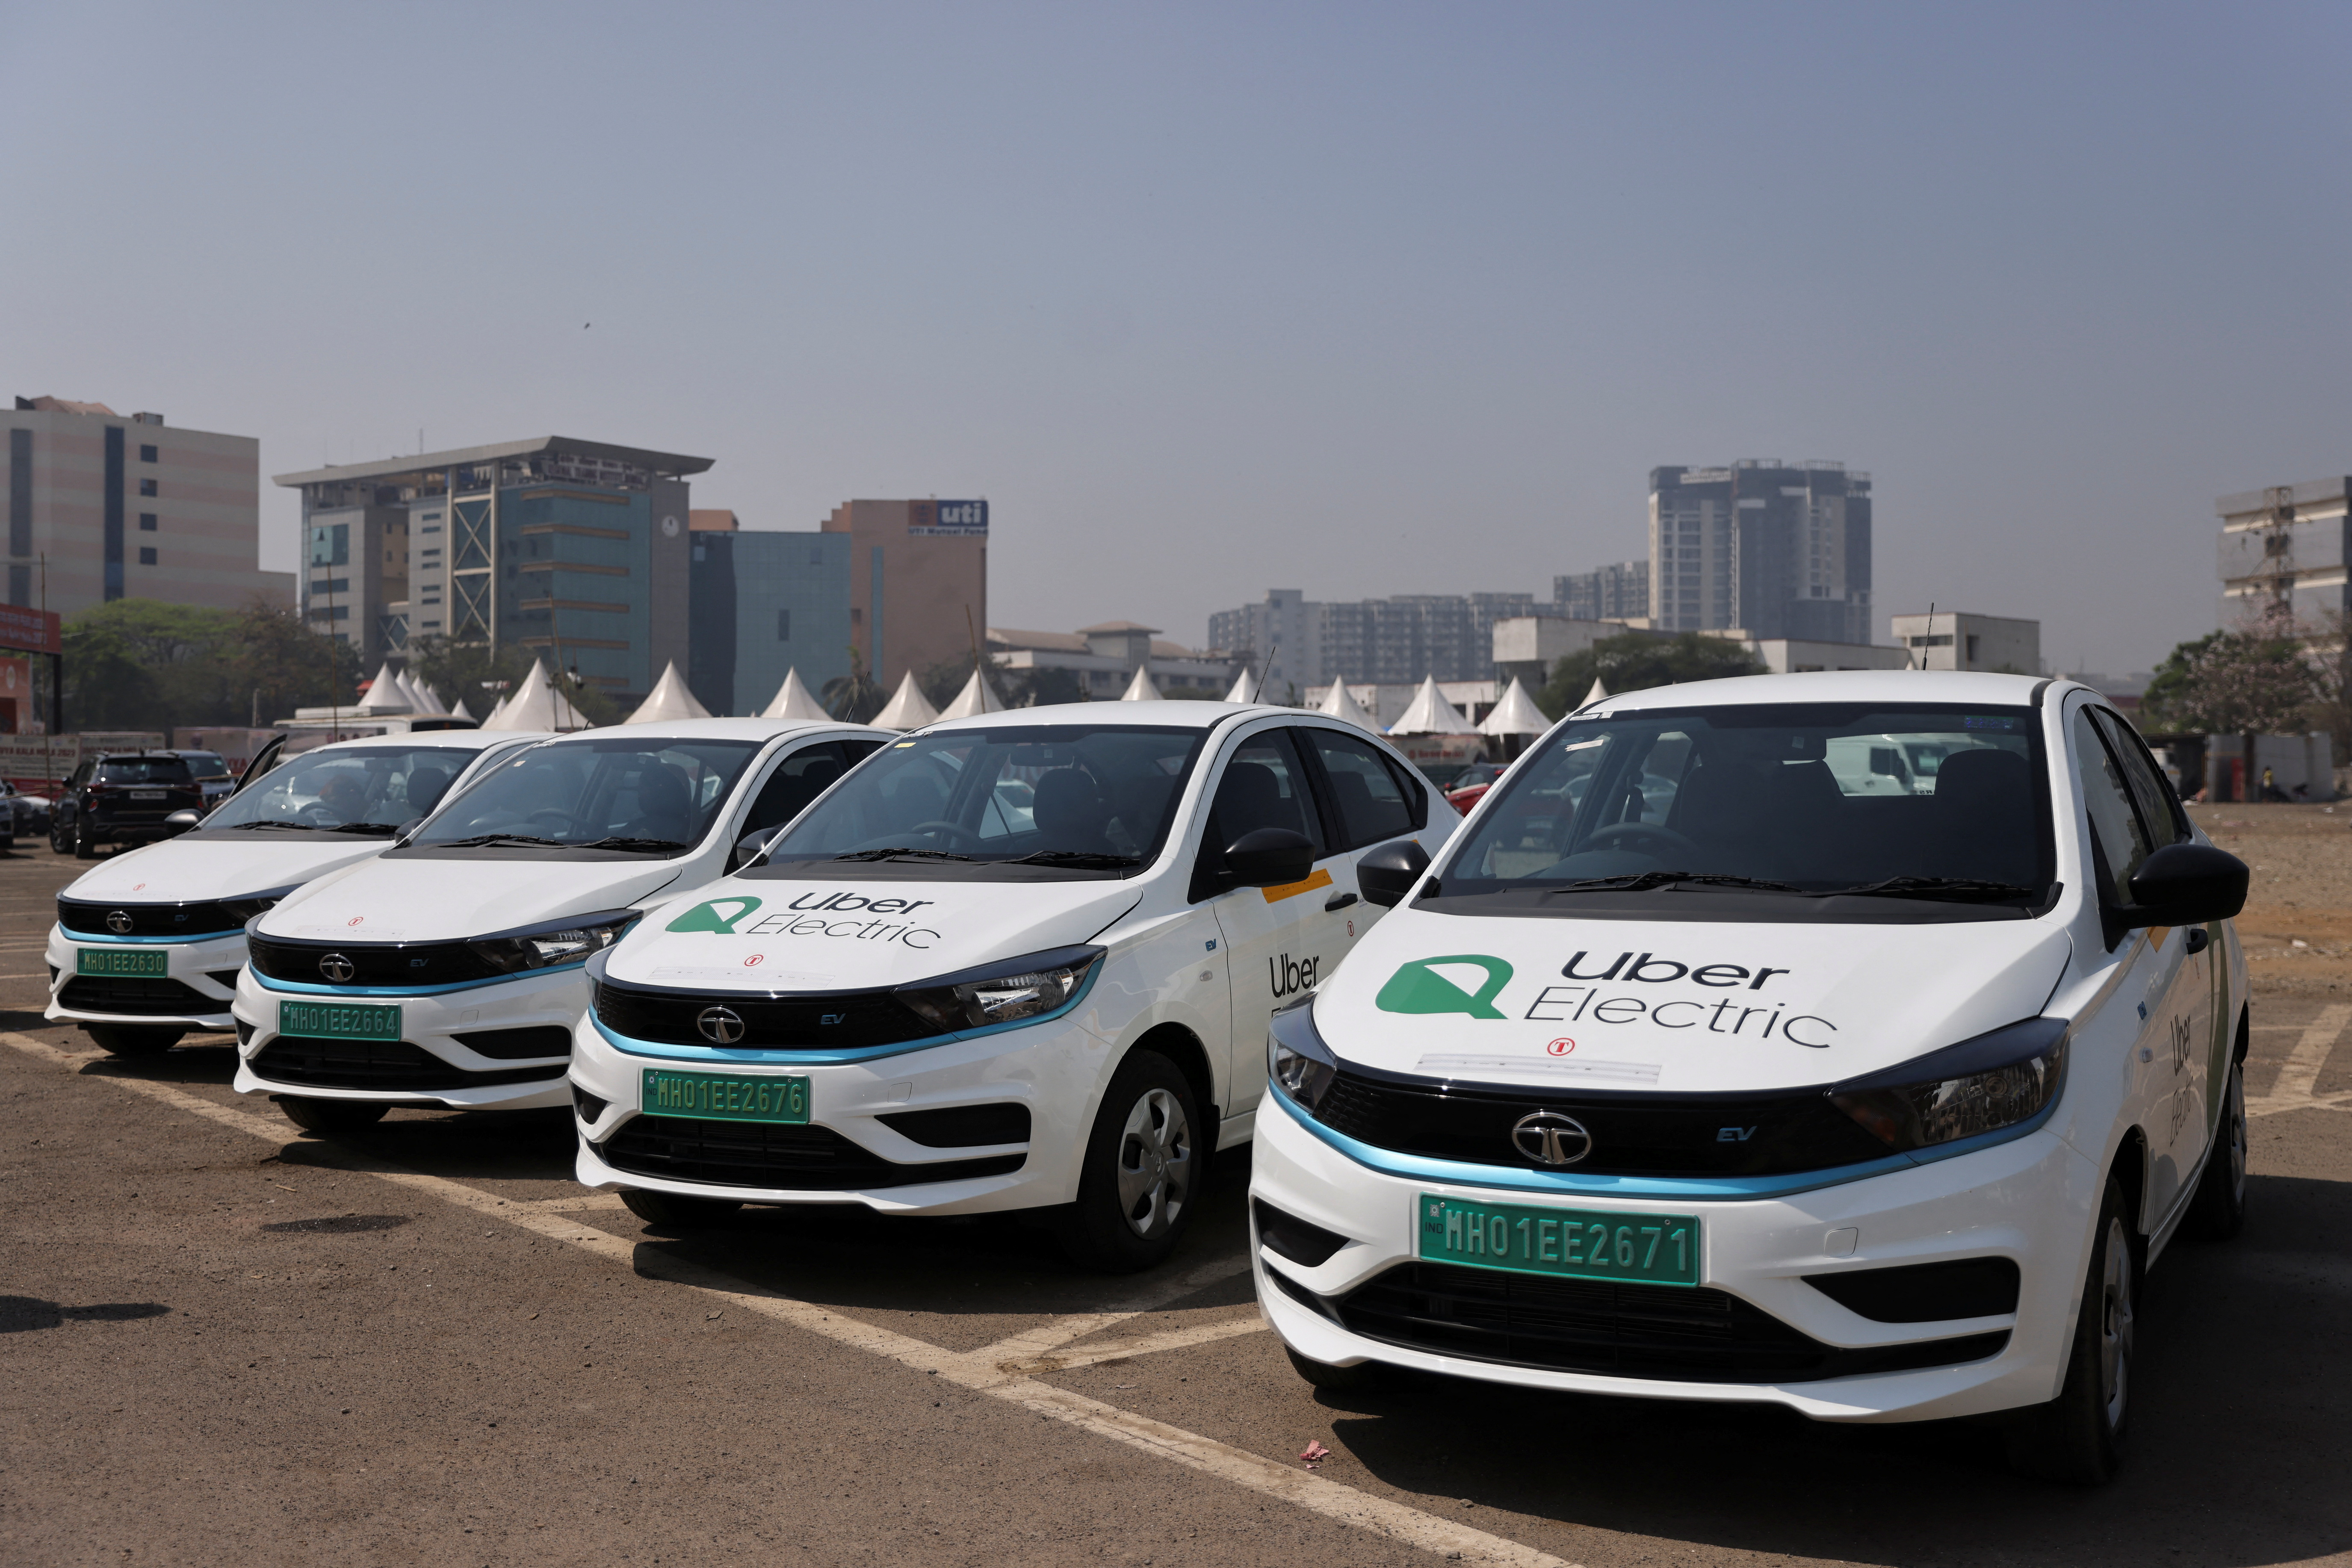 इलेक्ट्रिक वाहन से जाएंगे मतदान करने, तो मिलेंगी ये सहूलियतें

Electric vehicles (EV) owners can vote without waiting in long queues. The administration has taken this step to promote environmental awareness.If you go to vote by electric vehicle, you will get these facilities